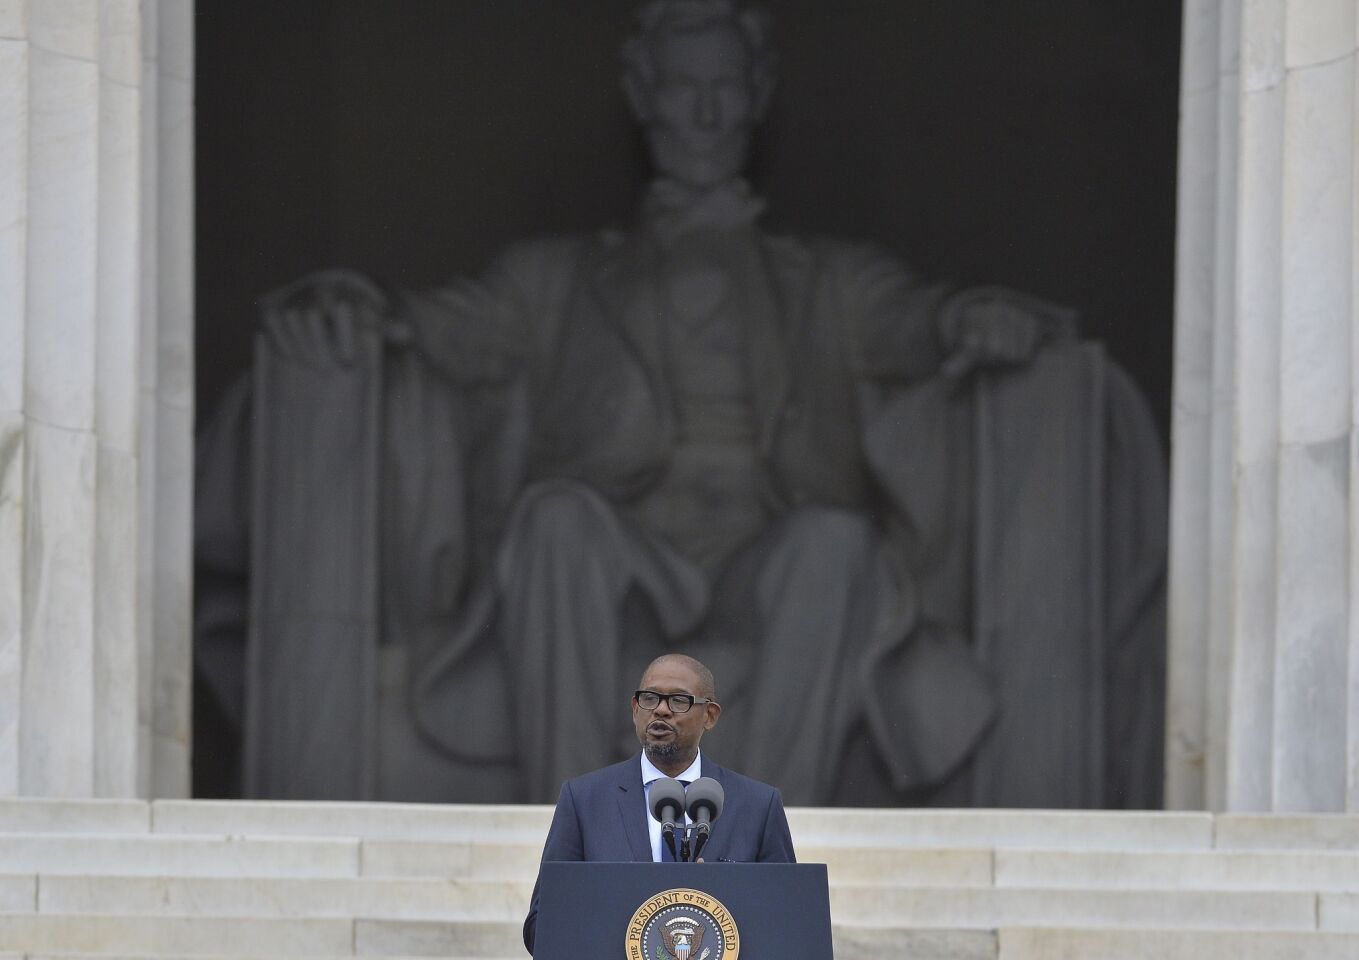 Actor Forest Whitaker speaks during the commemoration of the 50th anniversary of the March on Washington.